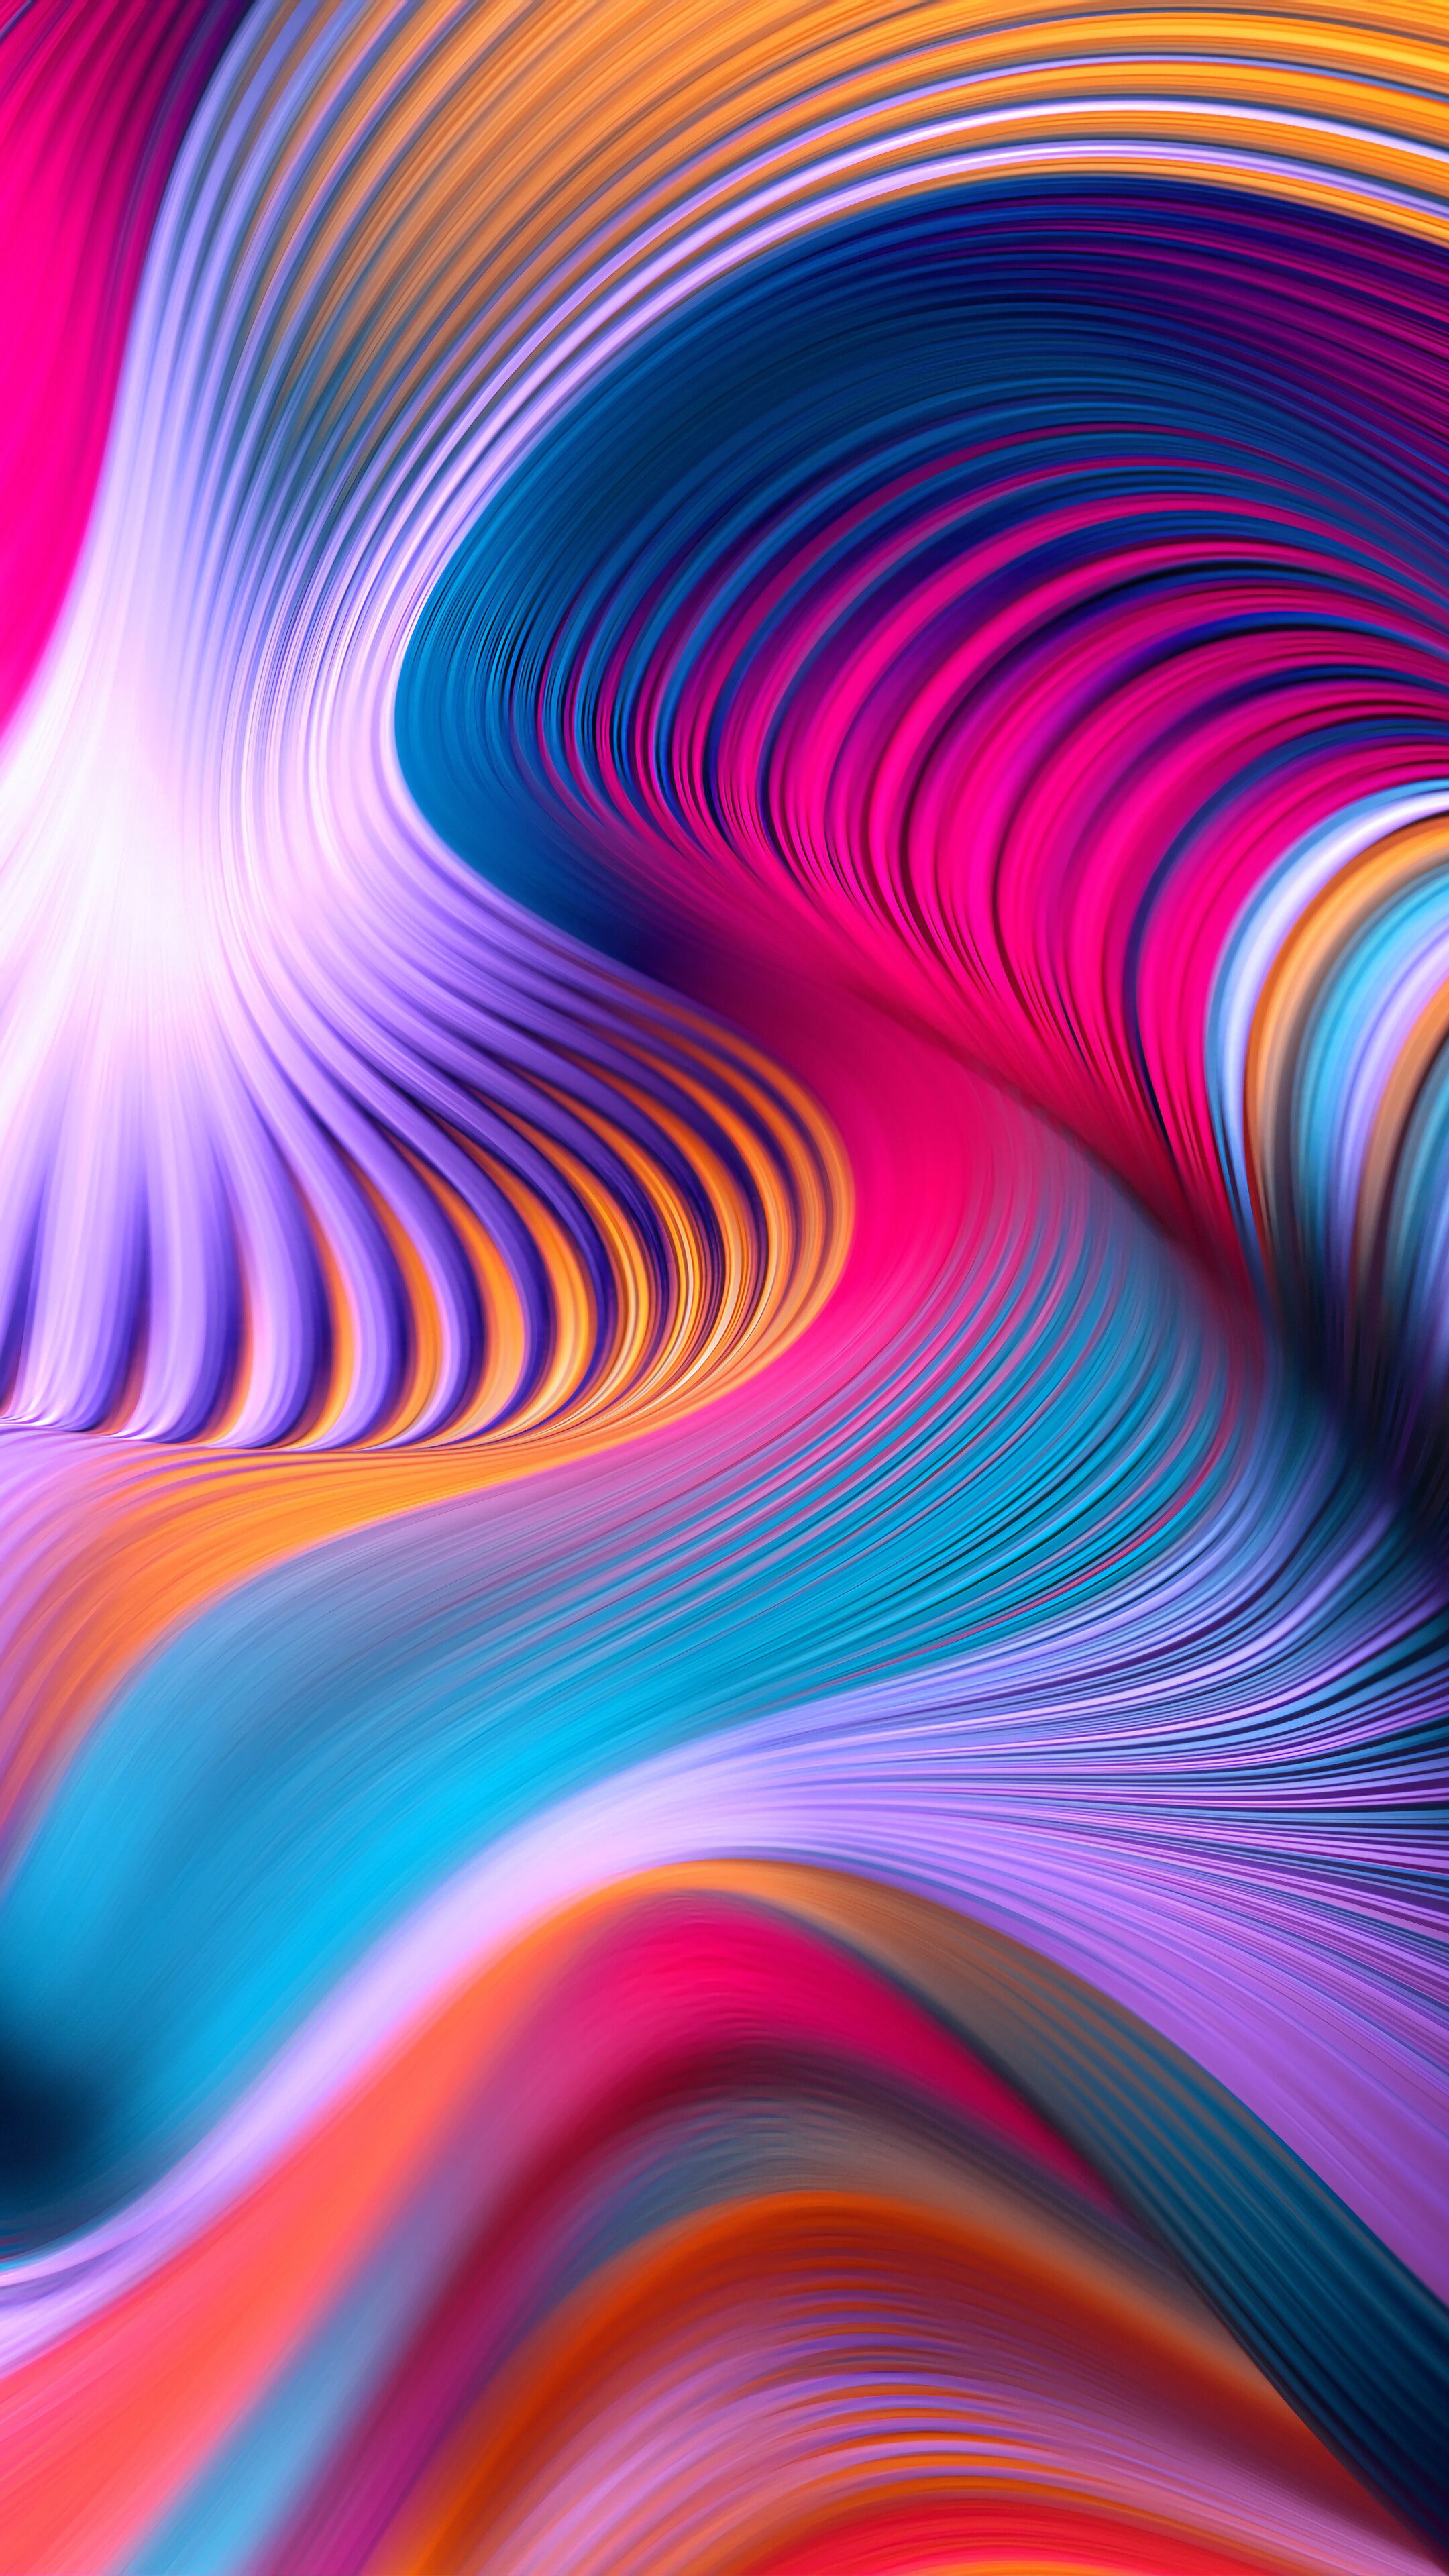 Colorful, Abstract, Moving, Wave, Digital Art, 4K phone HD Wallpaper, Image, Background, Photo and Picture. Mocah HD Wallpaper